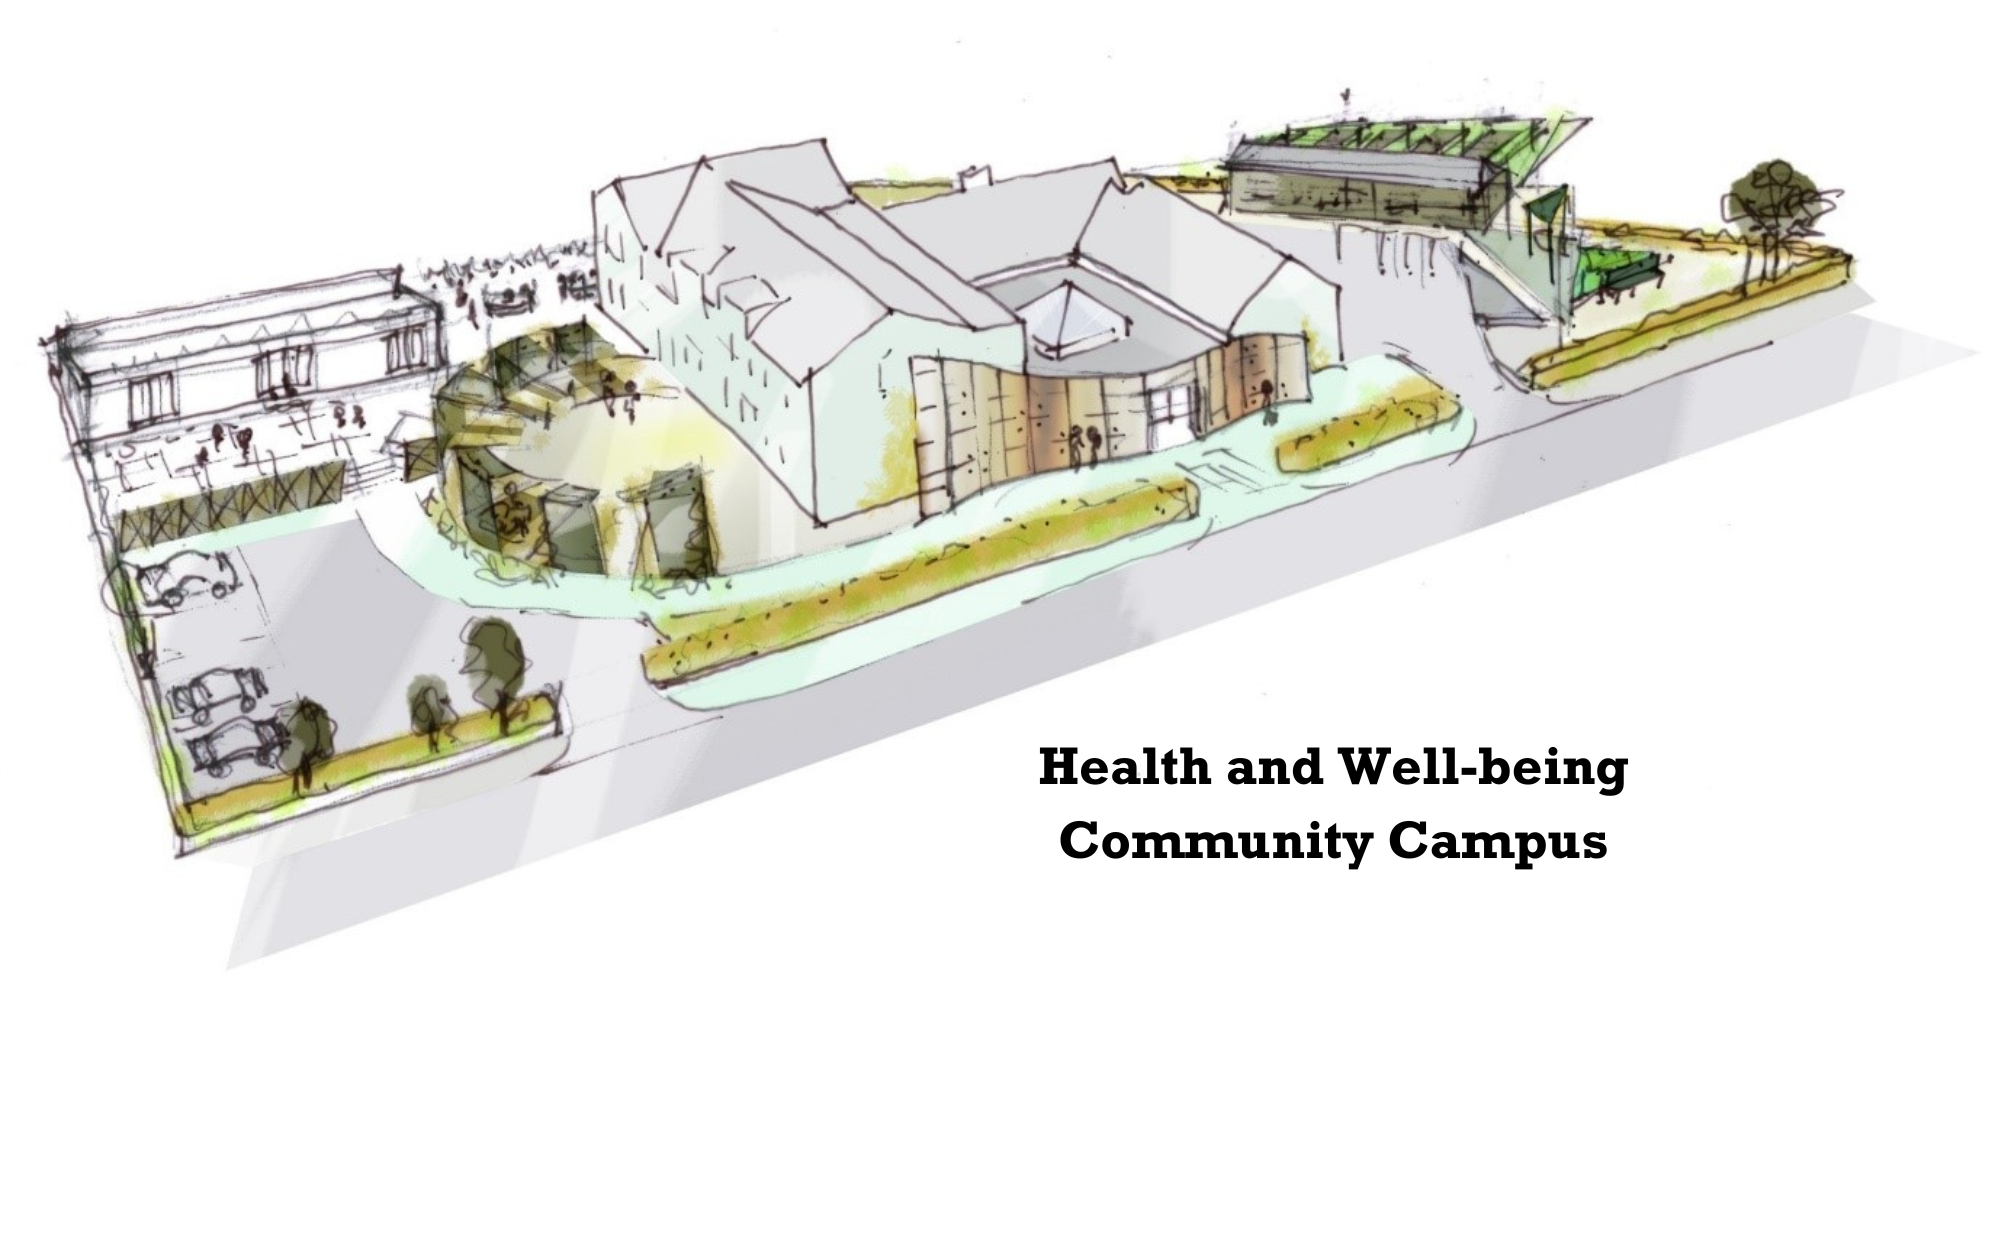 Architectural drawing of the new Health and Well-being community campus when complete